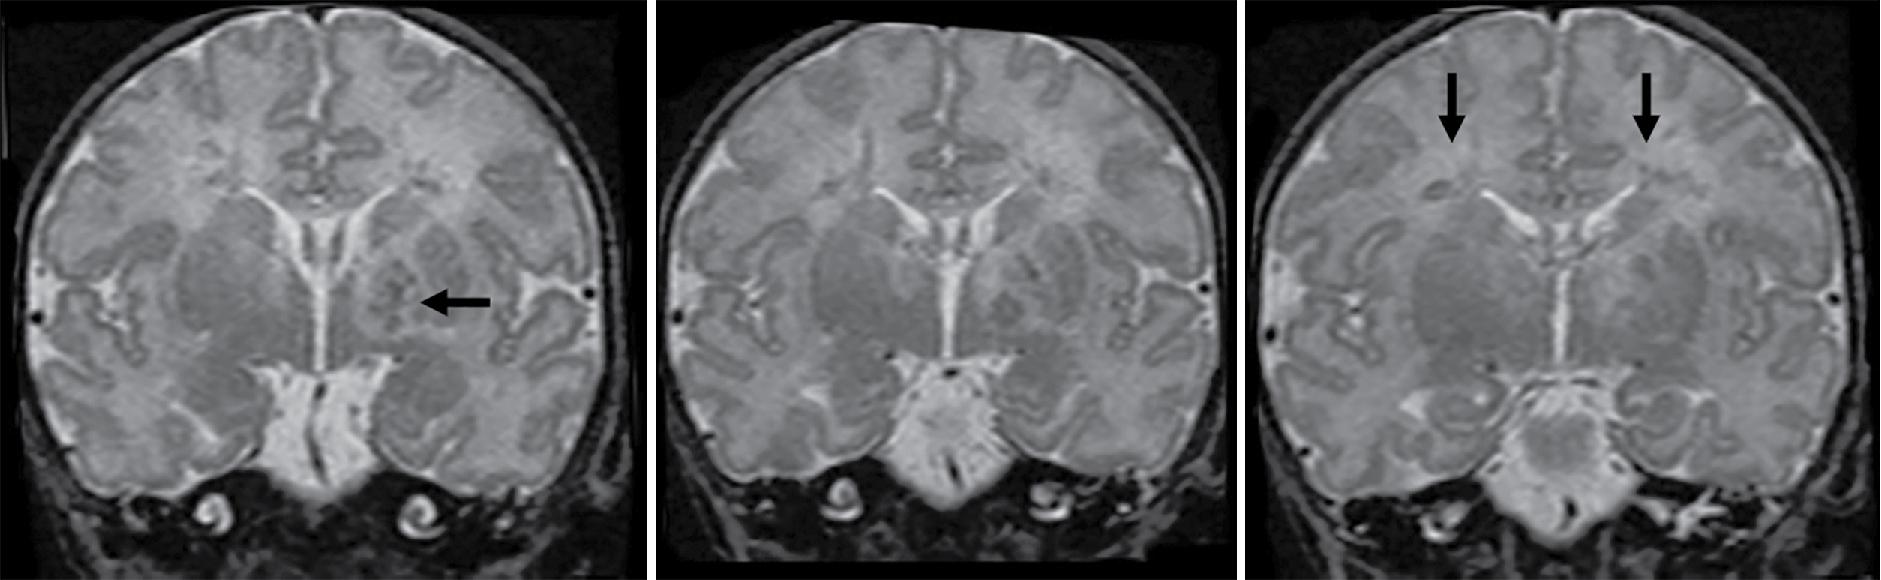 Fig. 15.6, Case 3: MRI 7 days after perinatal asphyxia. Coronal T2-weighted images showing T2 hypo- and hyperintensities in the central white matter with additional left-sided lesions in the internal capsule and lateral thalamus ( arrows ).